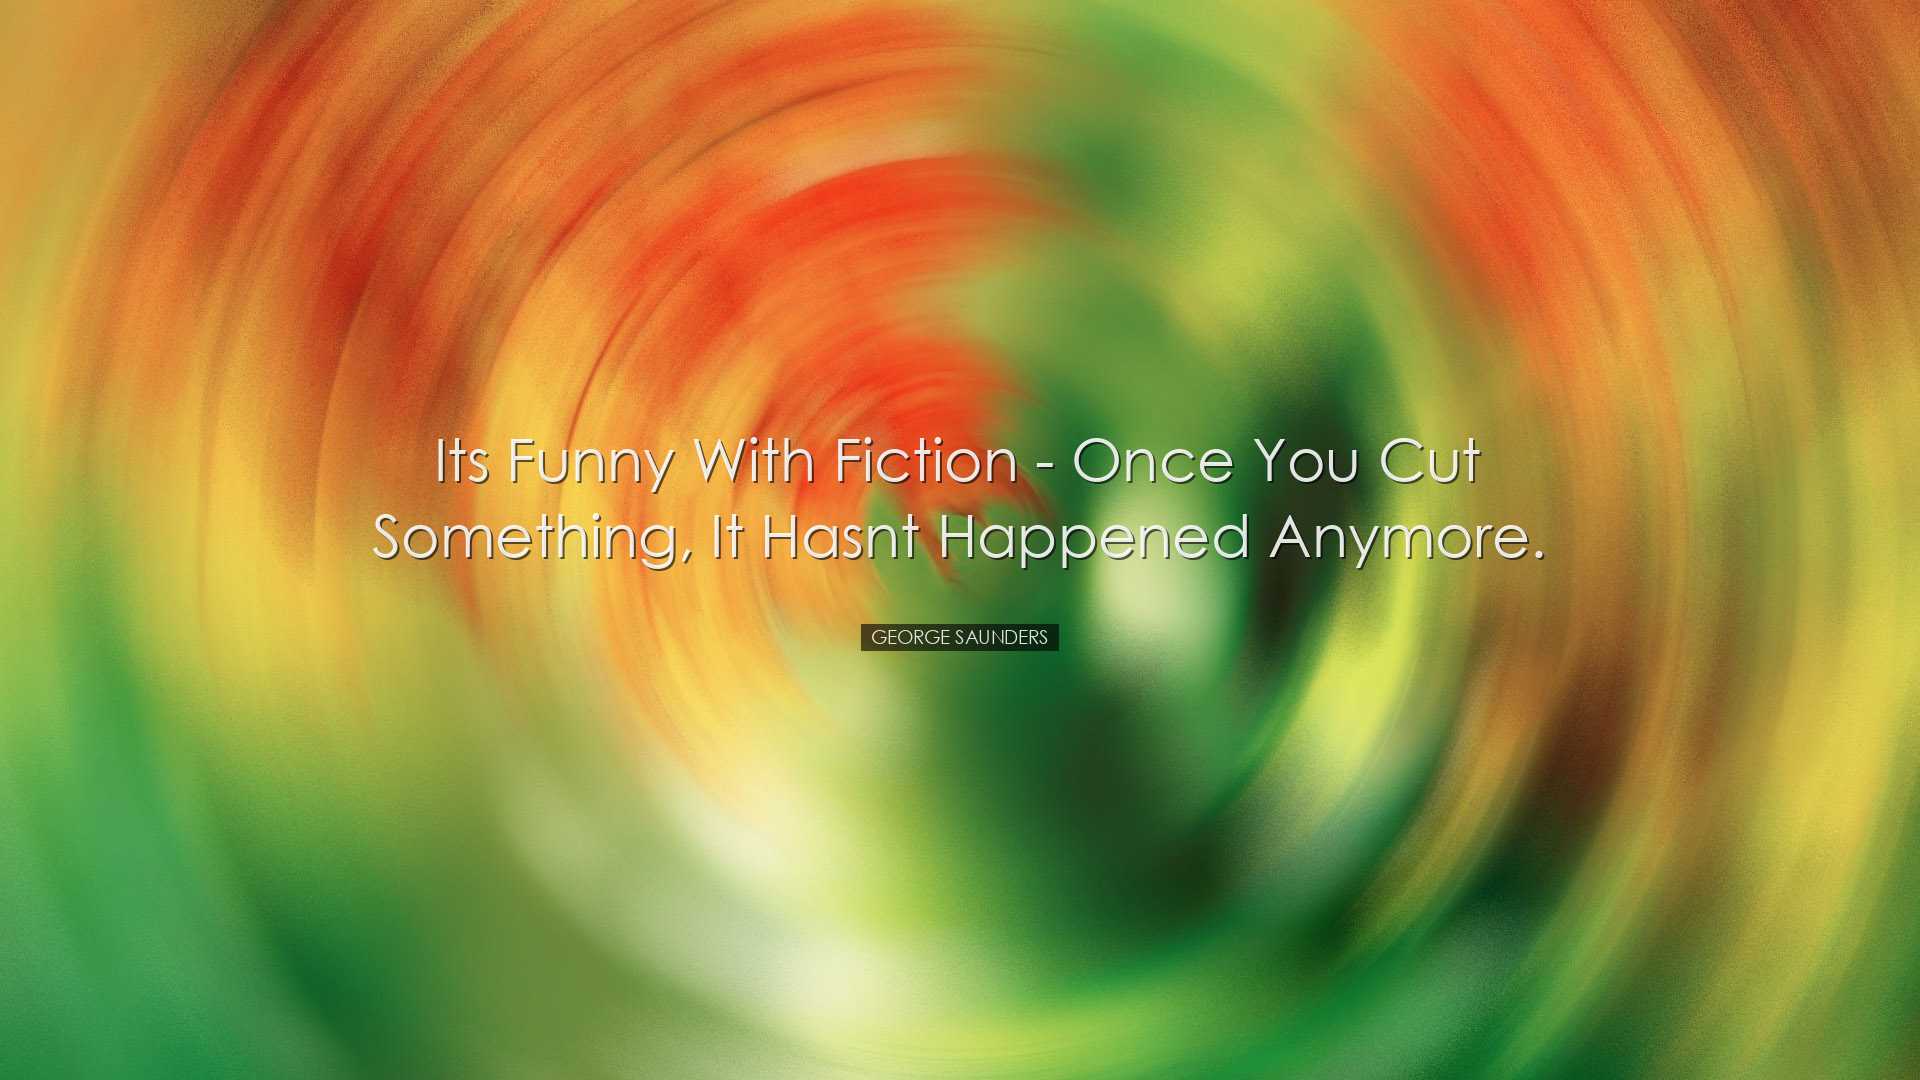 Its funny with fiction - once you cut something, it hasnt happened